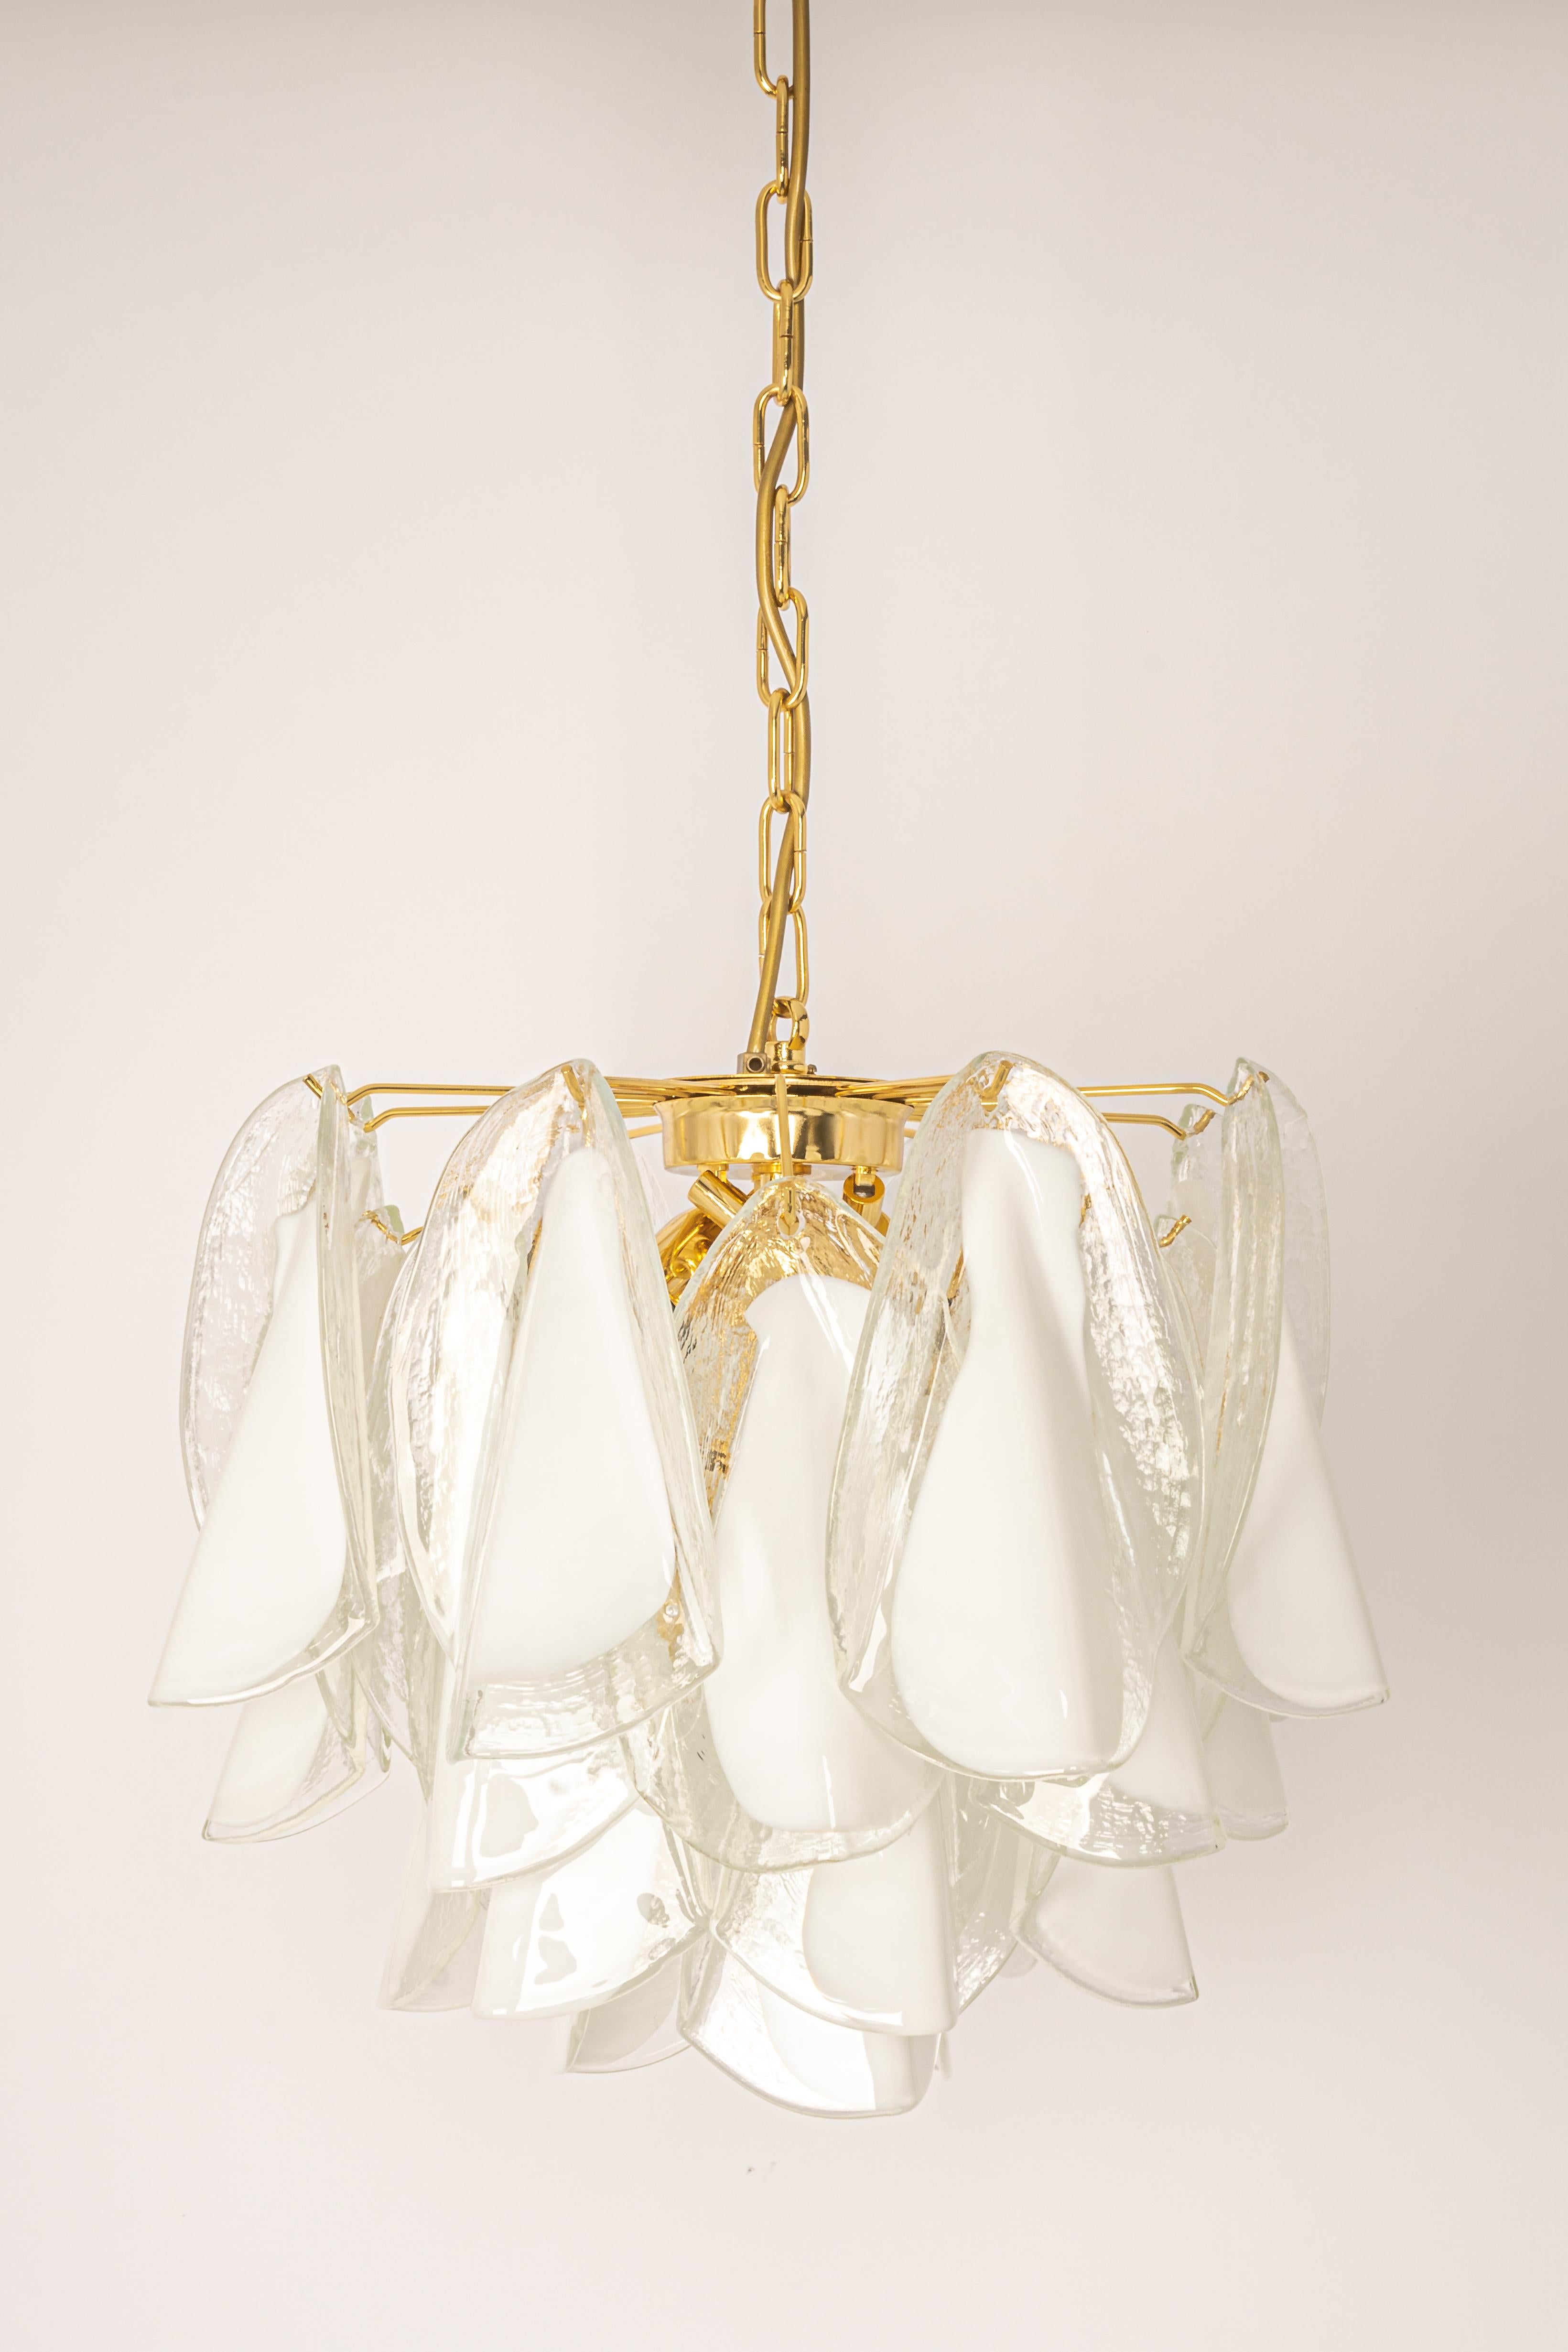 A stunning Murano glass chandelier designed by Carlo Nason for Mazzega, Italy, manufactured in the 1970s.
The chandelier is composed of many thick textured glass elements attached to a gilt brass frame.

High quality, very good condition.